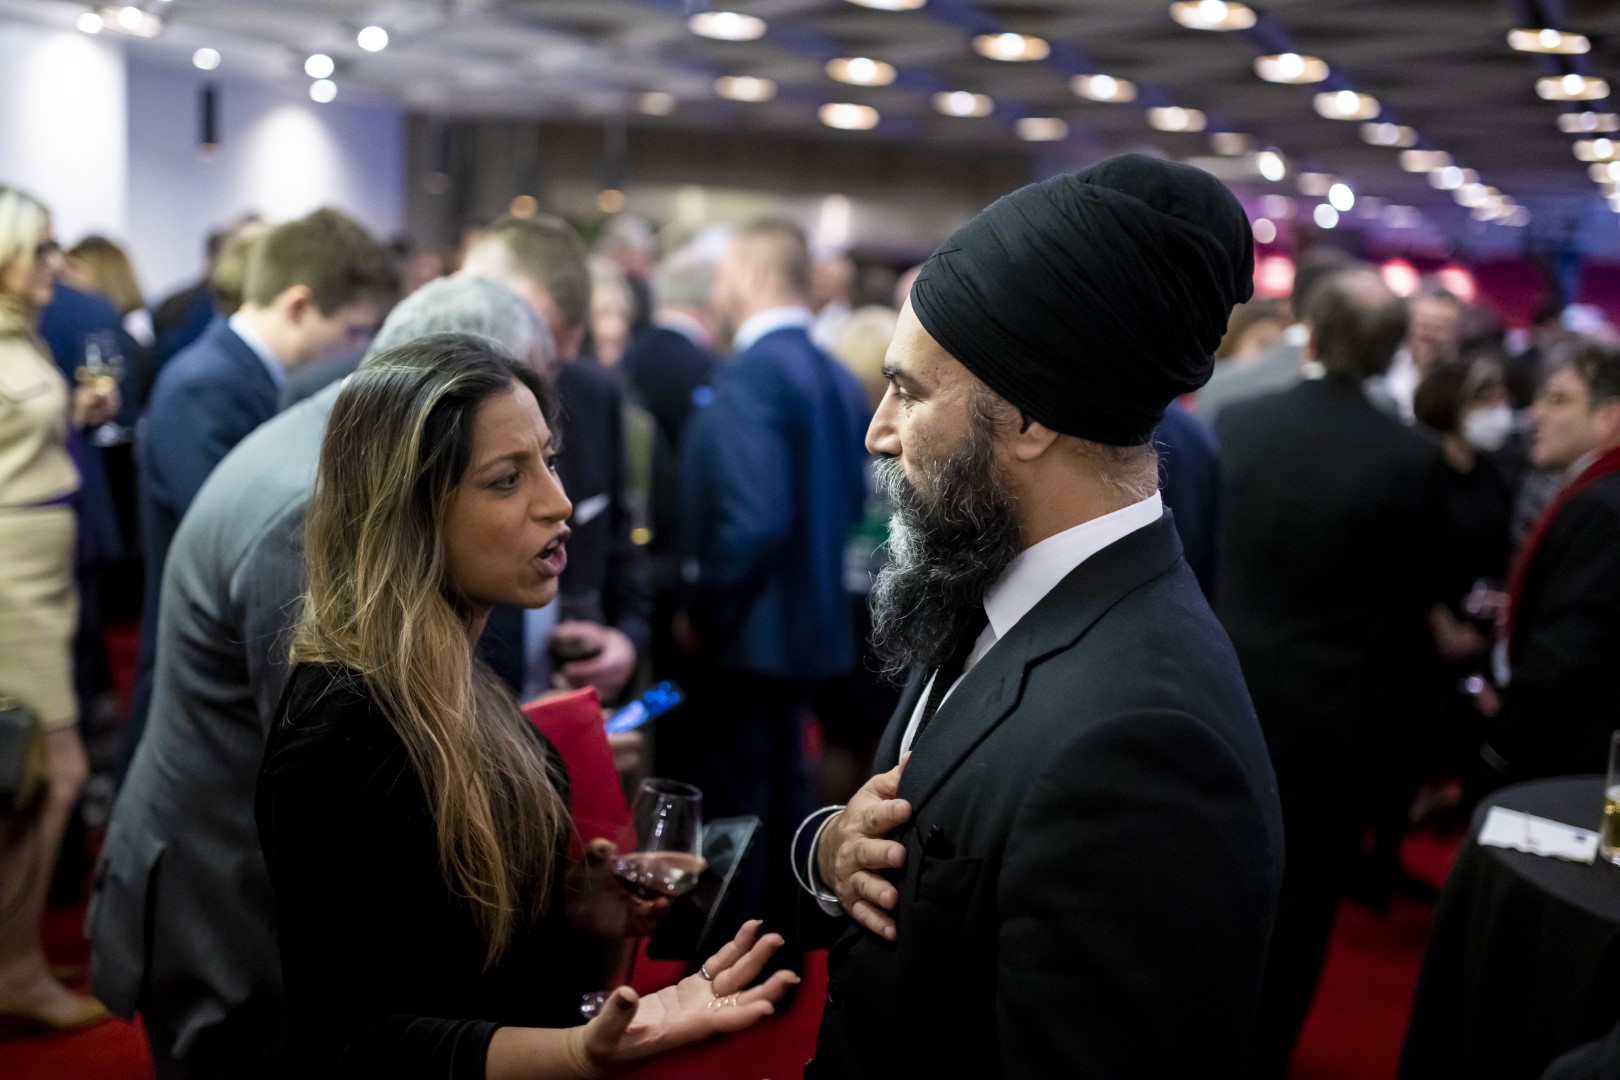 Jagmeet Singh (right) chats with a guest at the gala